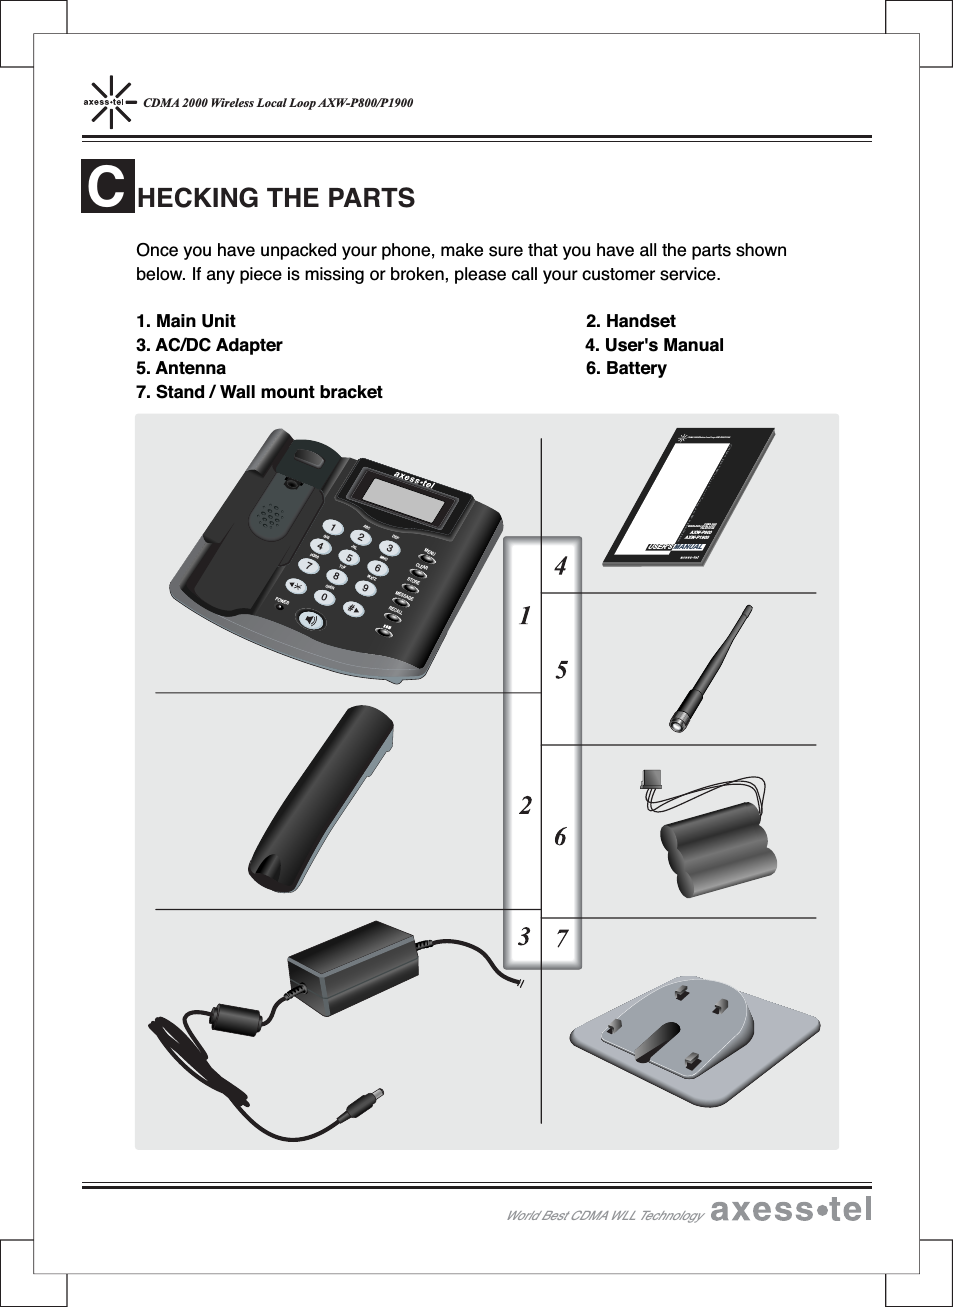 CDMA 2000 Wireless Local Loop AXW-P800/P1900Once you have unpacked your phone, make sure that you have all the parts shownbelow. If any piece is missing or broken, please call your customer service.1. Main Unit 2. Handset3. AC/DC Adapter 4. User&apos;s Manual5. Antenna 6. Battery7. Stand / Wall mount bracketHECKING THE PARTSWorld Best CDMA WLL TechnologyC12546890#37MENUCLEARSTORERECALLPOWERMESSAGEABCDEFGHI JKL MNOPQRSTUV WXYZOPERCDMA2000WirelessLocal LoopAXW-P800/P1900DCCMDDAMM2000WiWWriielellsesLocalLoopoAXW-WWP-800/00P//1PP900CDMA2000WIRELESSLOCALLOOPTELEPHONEAXW-P800AXW-P1900USER&apos;S MANUAL